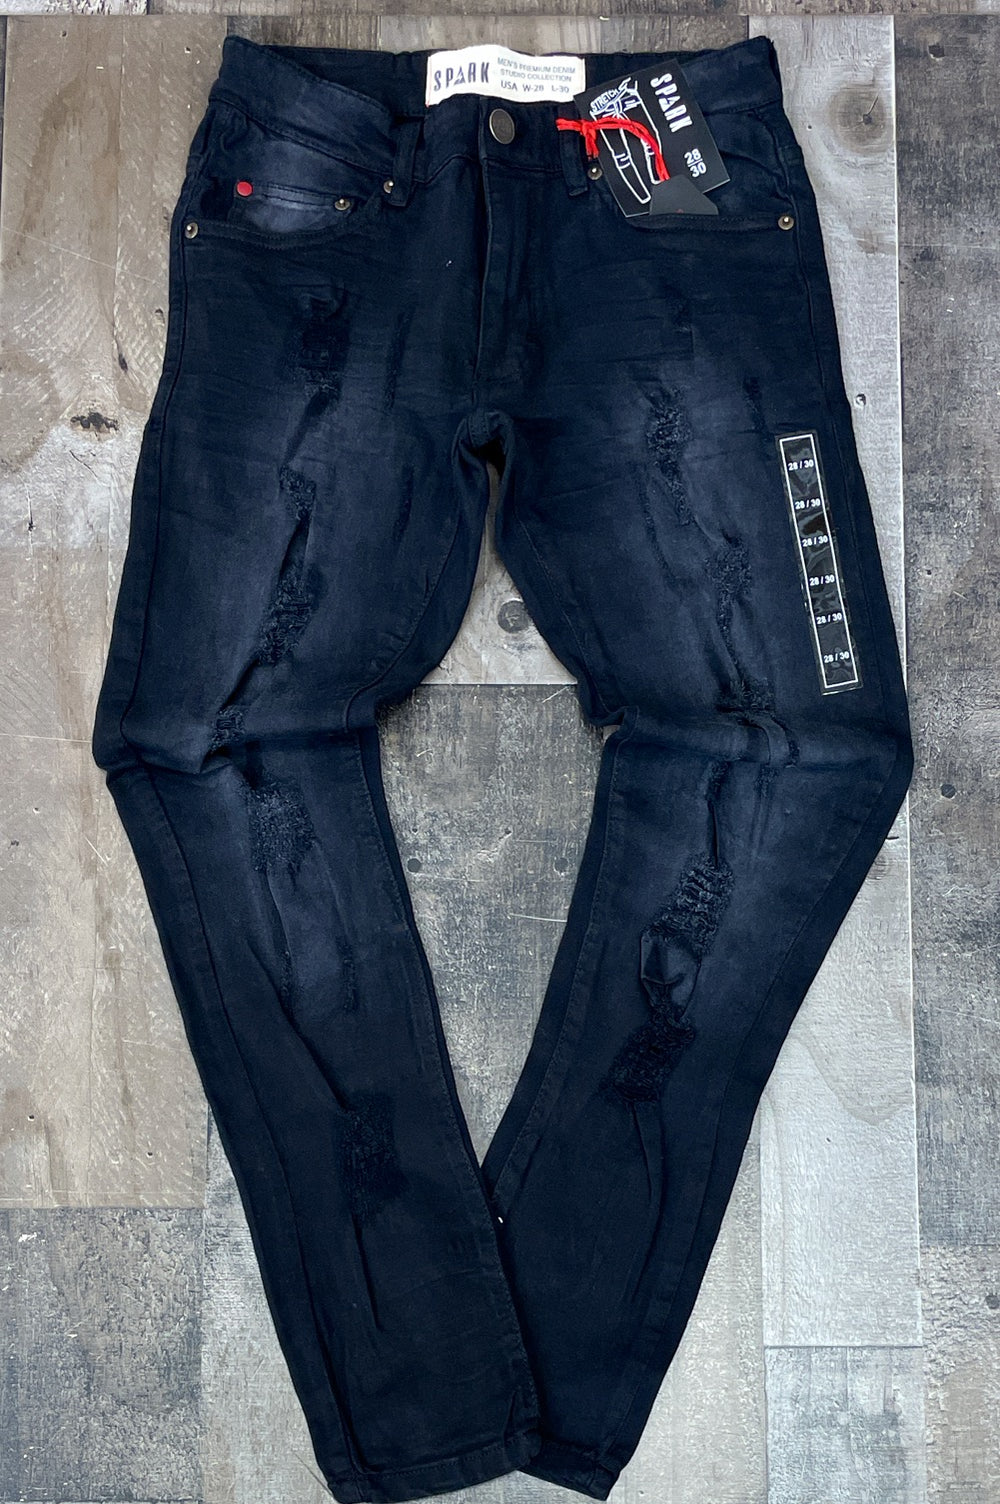 Spark- ripped color jeans